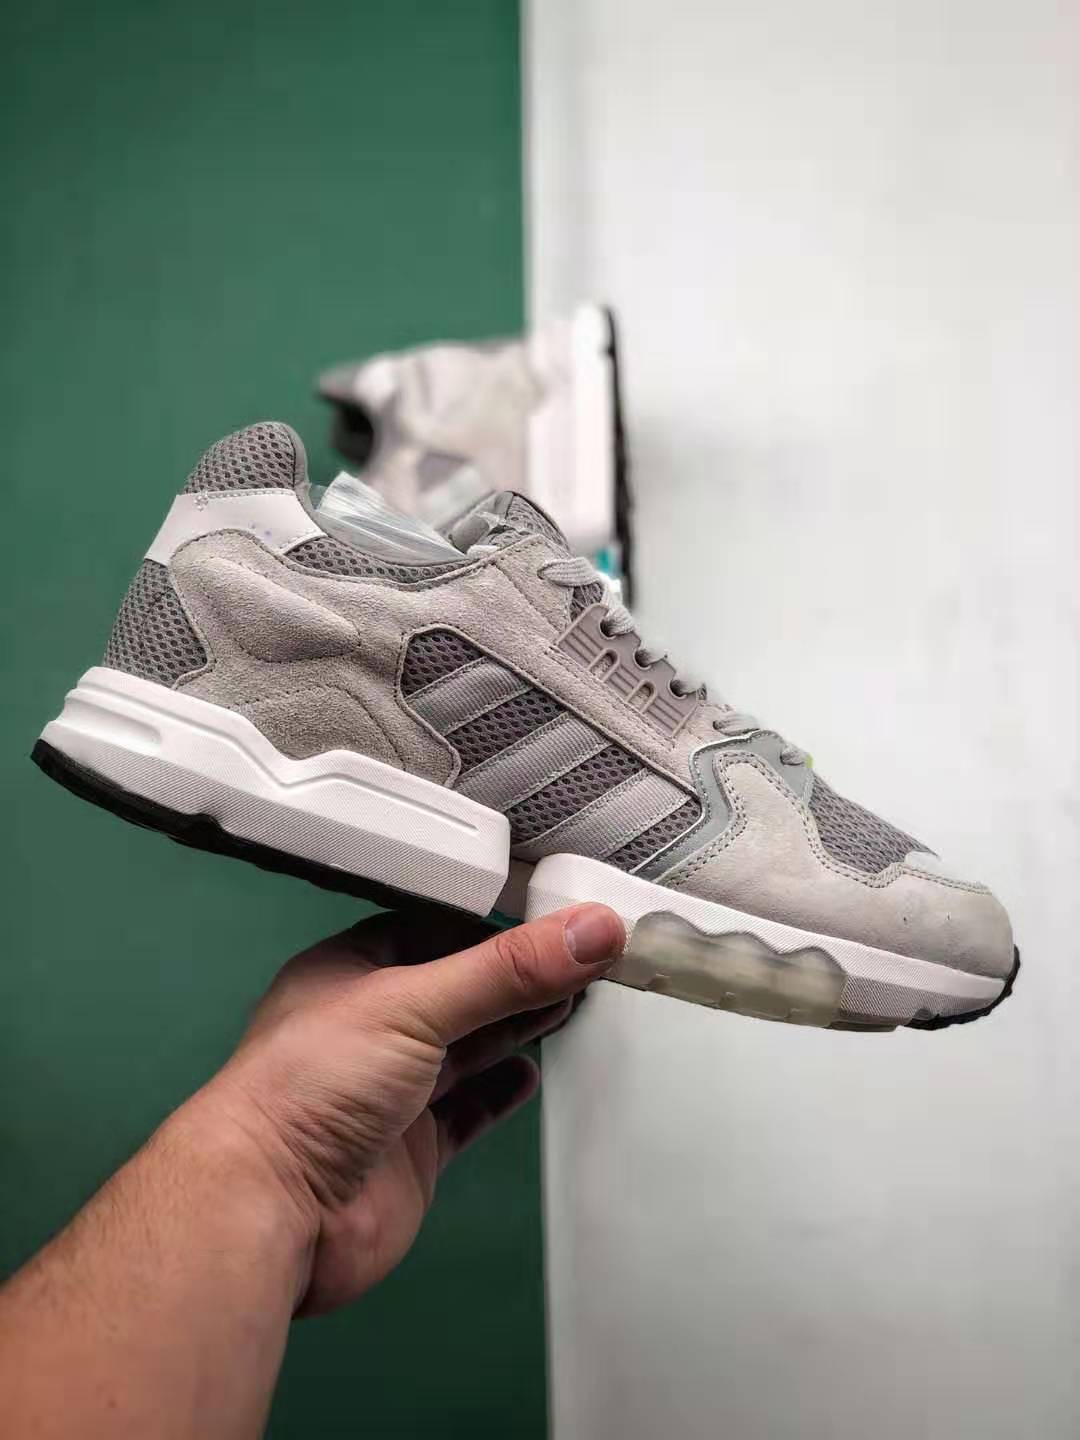 Adidas ZX Torsion 'Grey Two' EE4809 - Shop the Latest Collection!